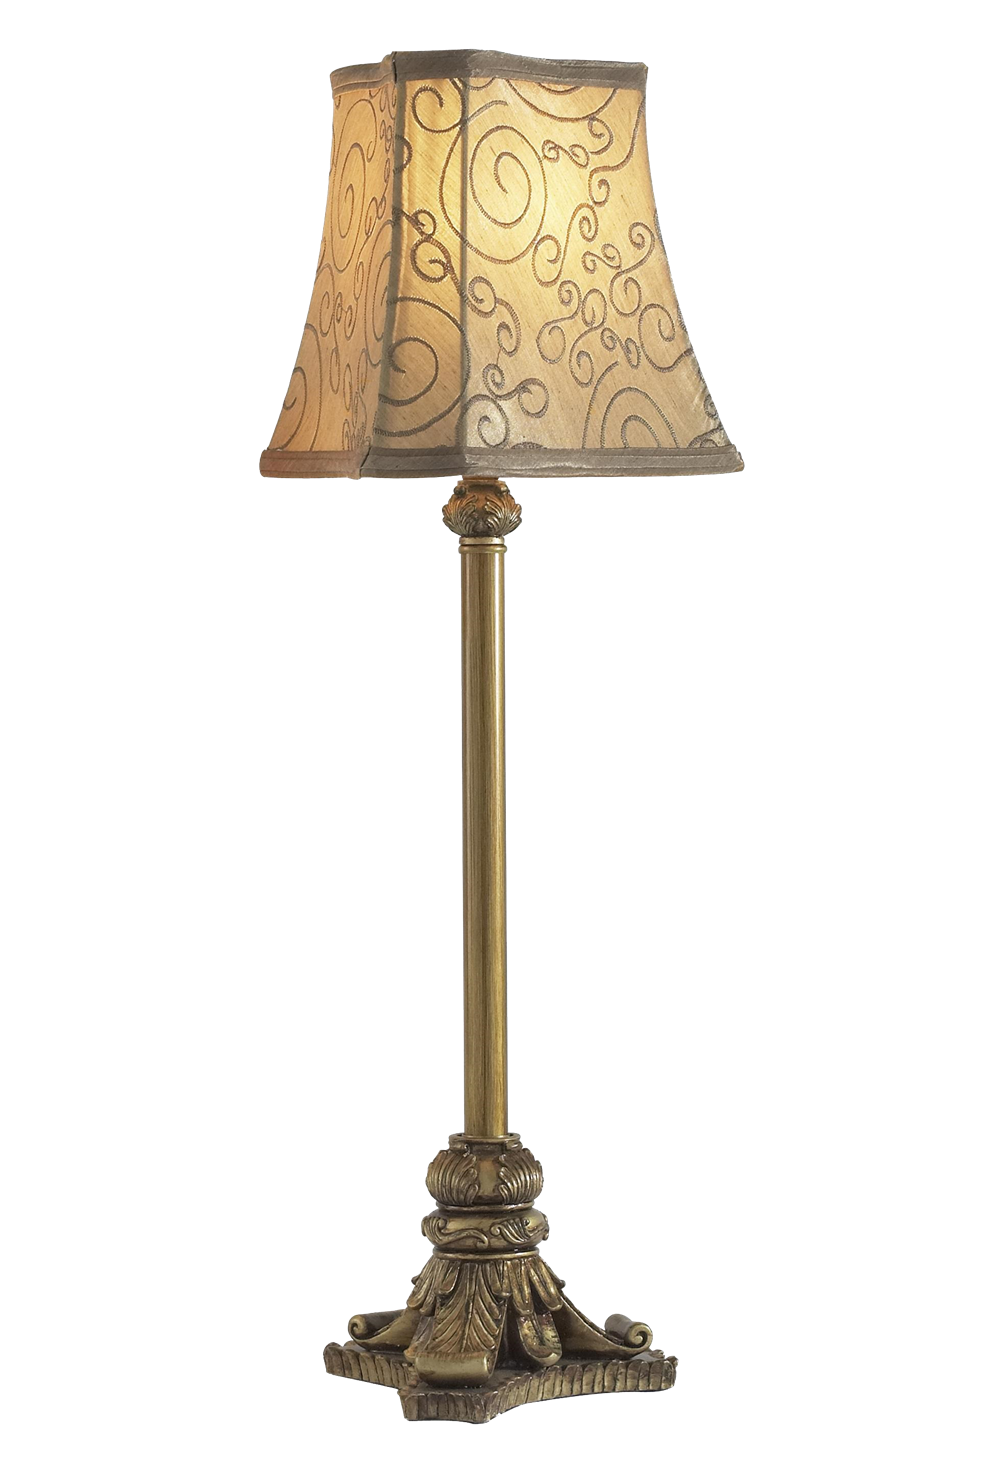 Light Lamp Png Images - Lamp Png Transparent Images | Bodenswasuee